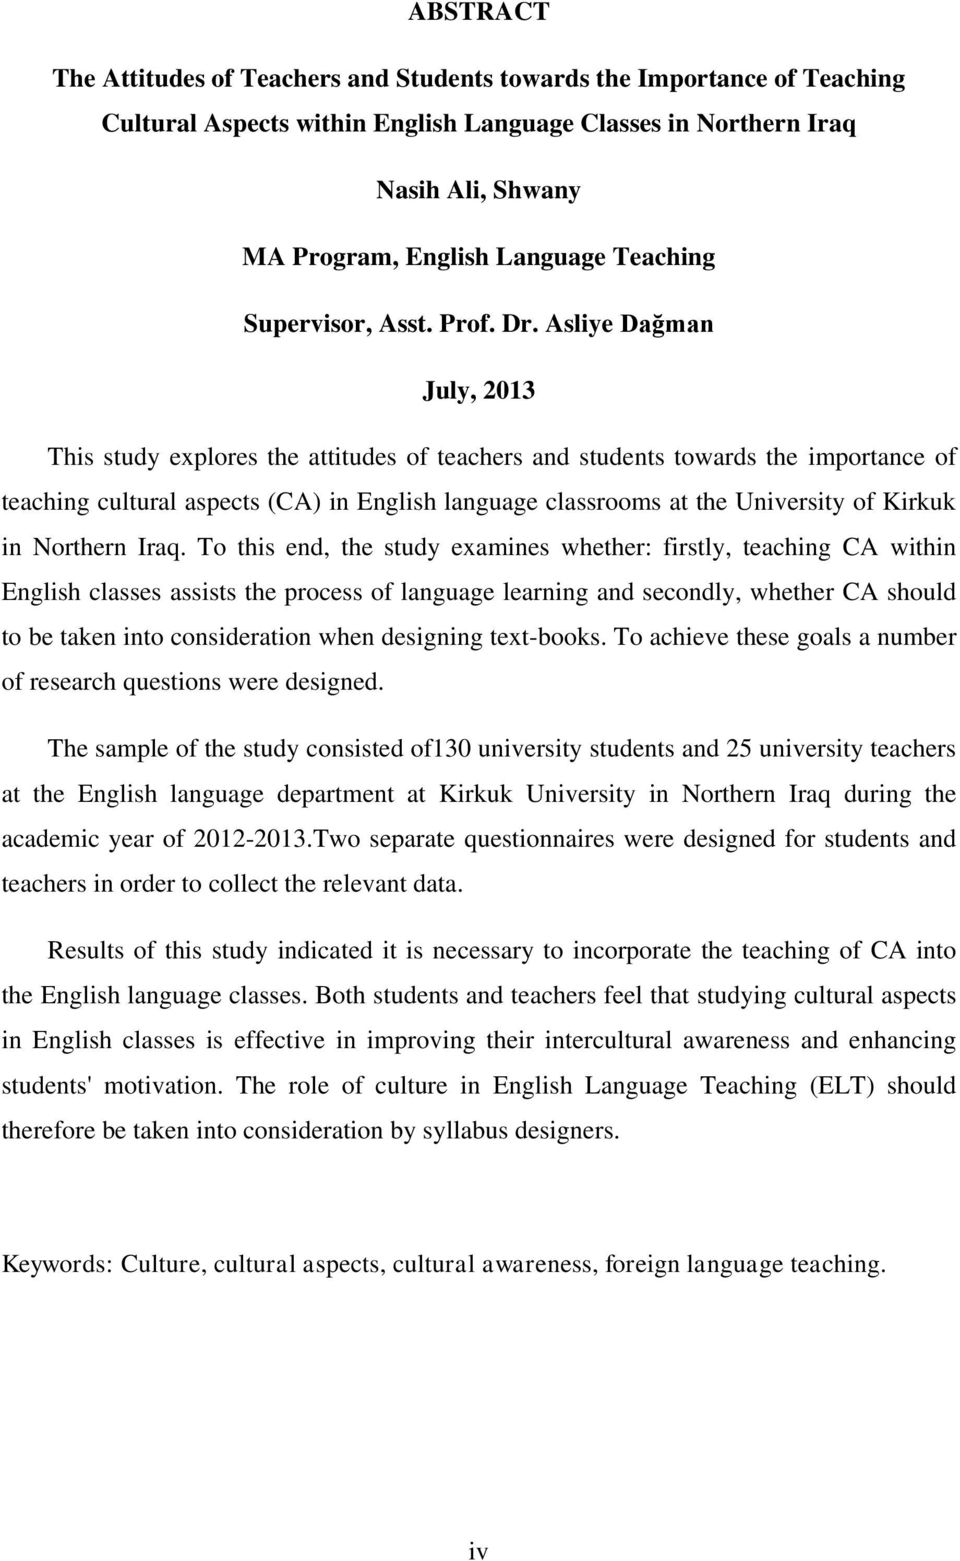 Asliye Dağman July, 2013 This study explores the attitudes of teachers and students towards the importance of teaching cultural aspects (CA) in English language classrooms at the University of Kirkuk